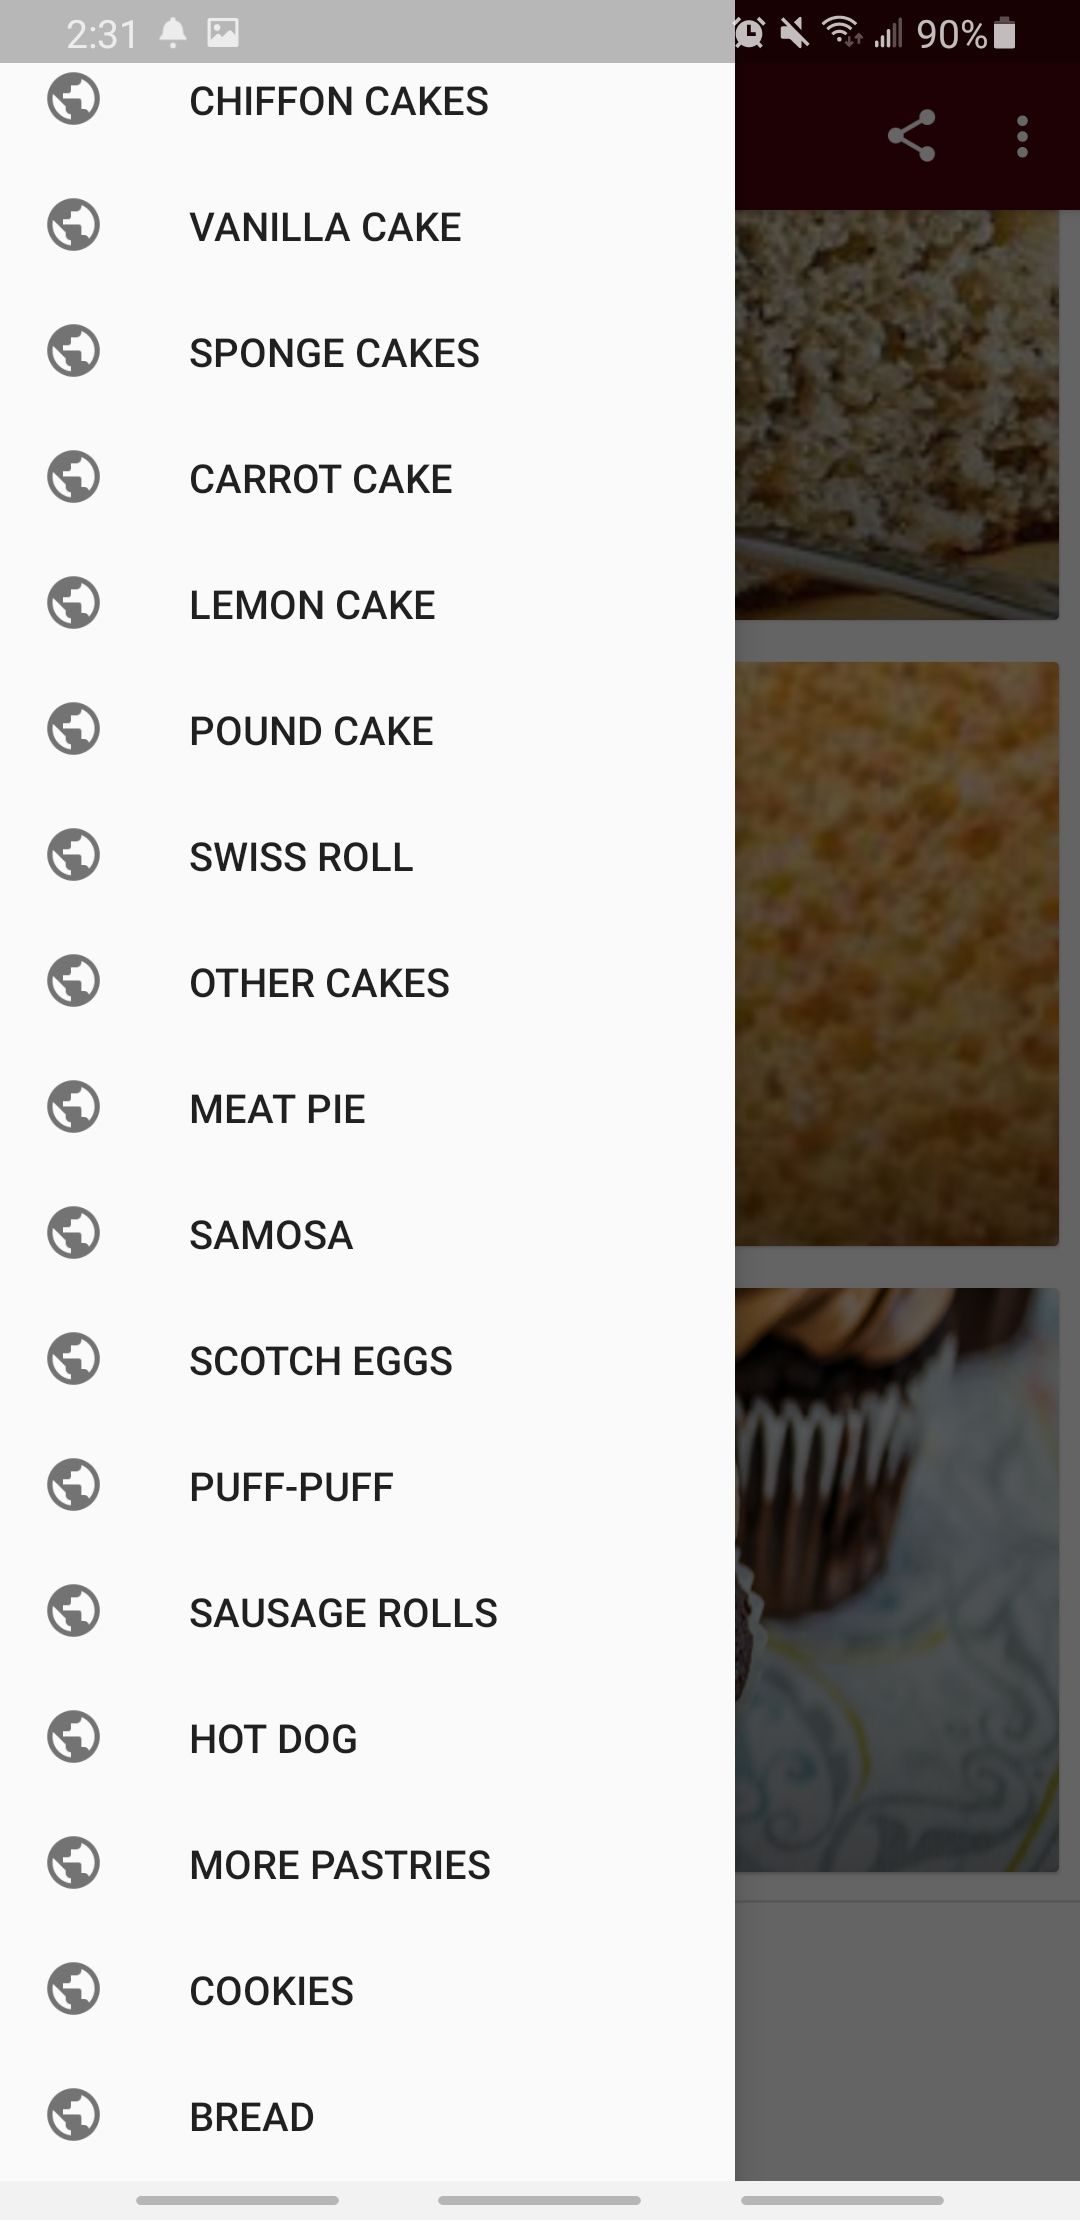 all baking recipes app showing all different types of cake recipes